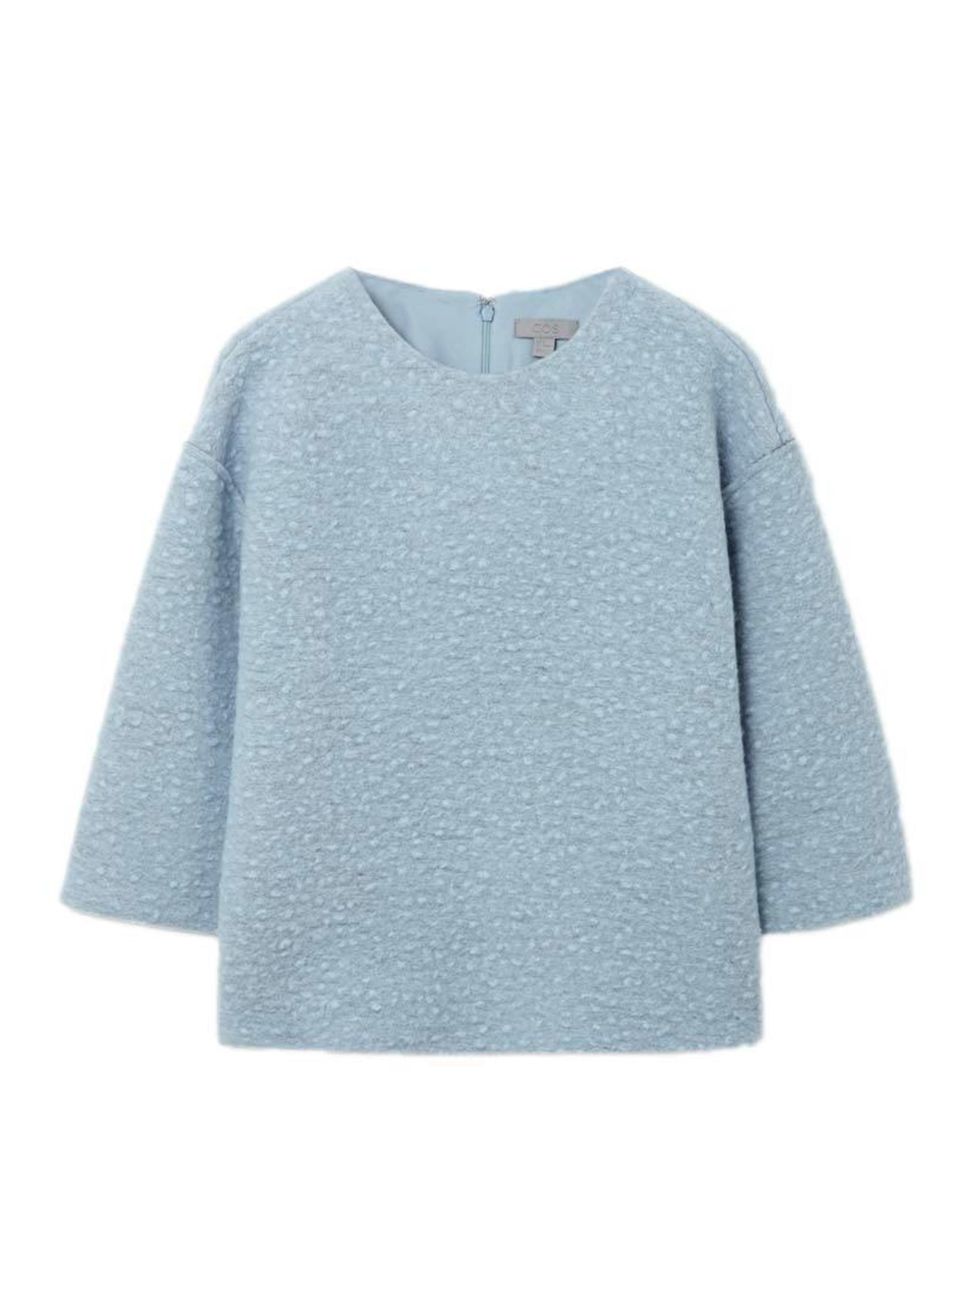 <p>Editorial Assistant Gillian Brett will pair this with culottes and ankle boots.</p>

<p> </p>

<p><a href="http://www.cosstores.com/gb/Shop/Women/New/Raw-edge_wool_top/365246-17238523.1#c-24479" target="_blank">Cos</a> top, £79</p>